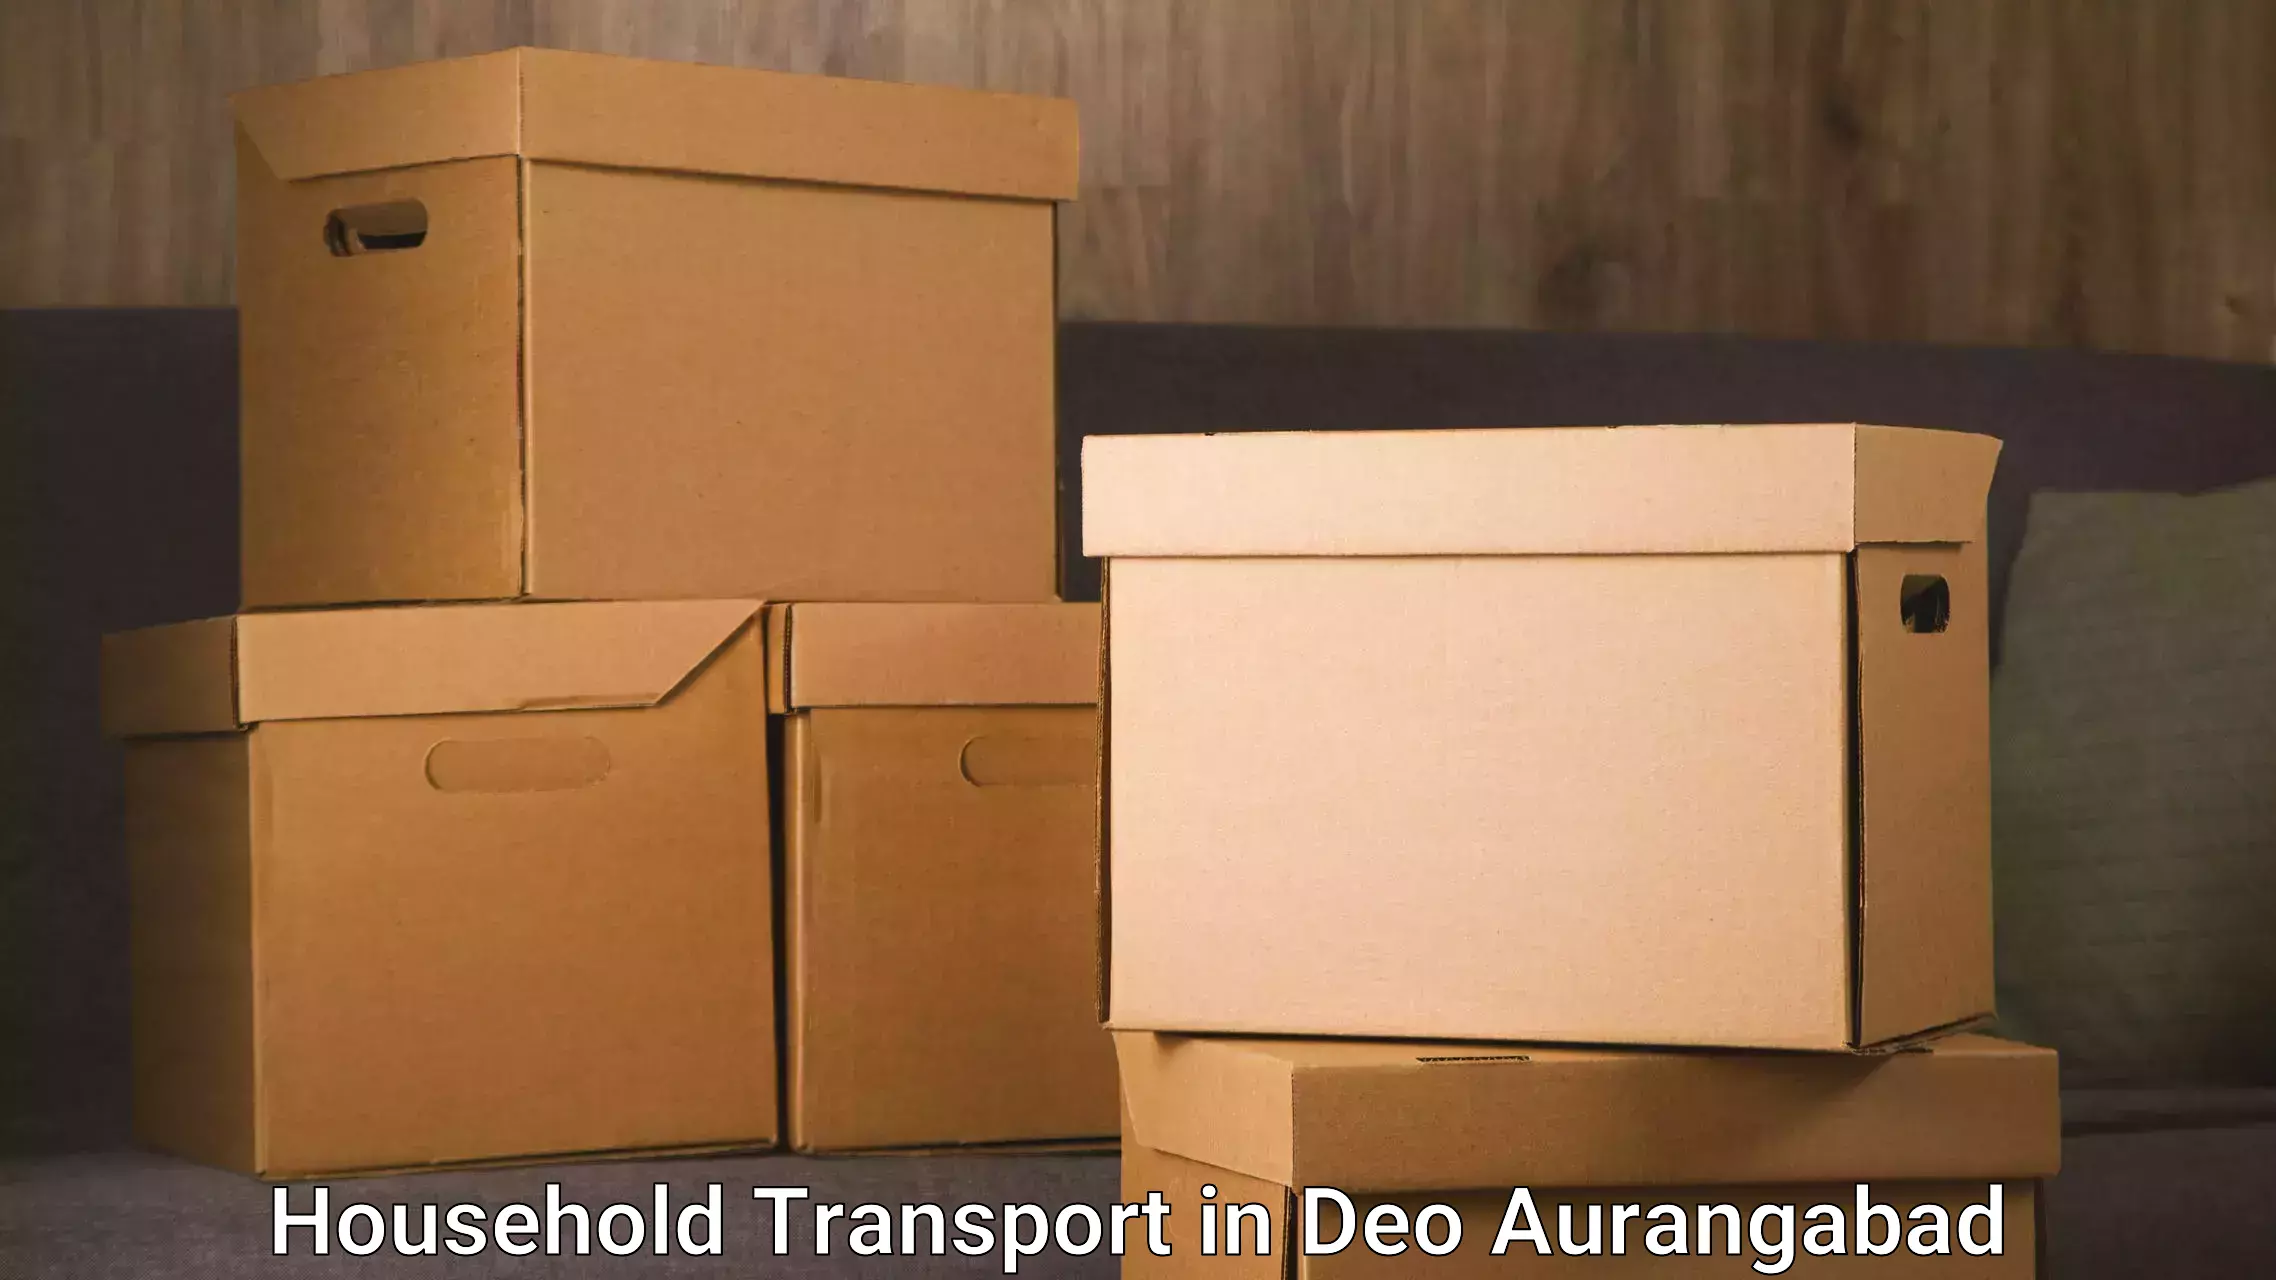 Quality relocation assistance in Deo Aurangabad